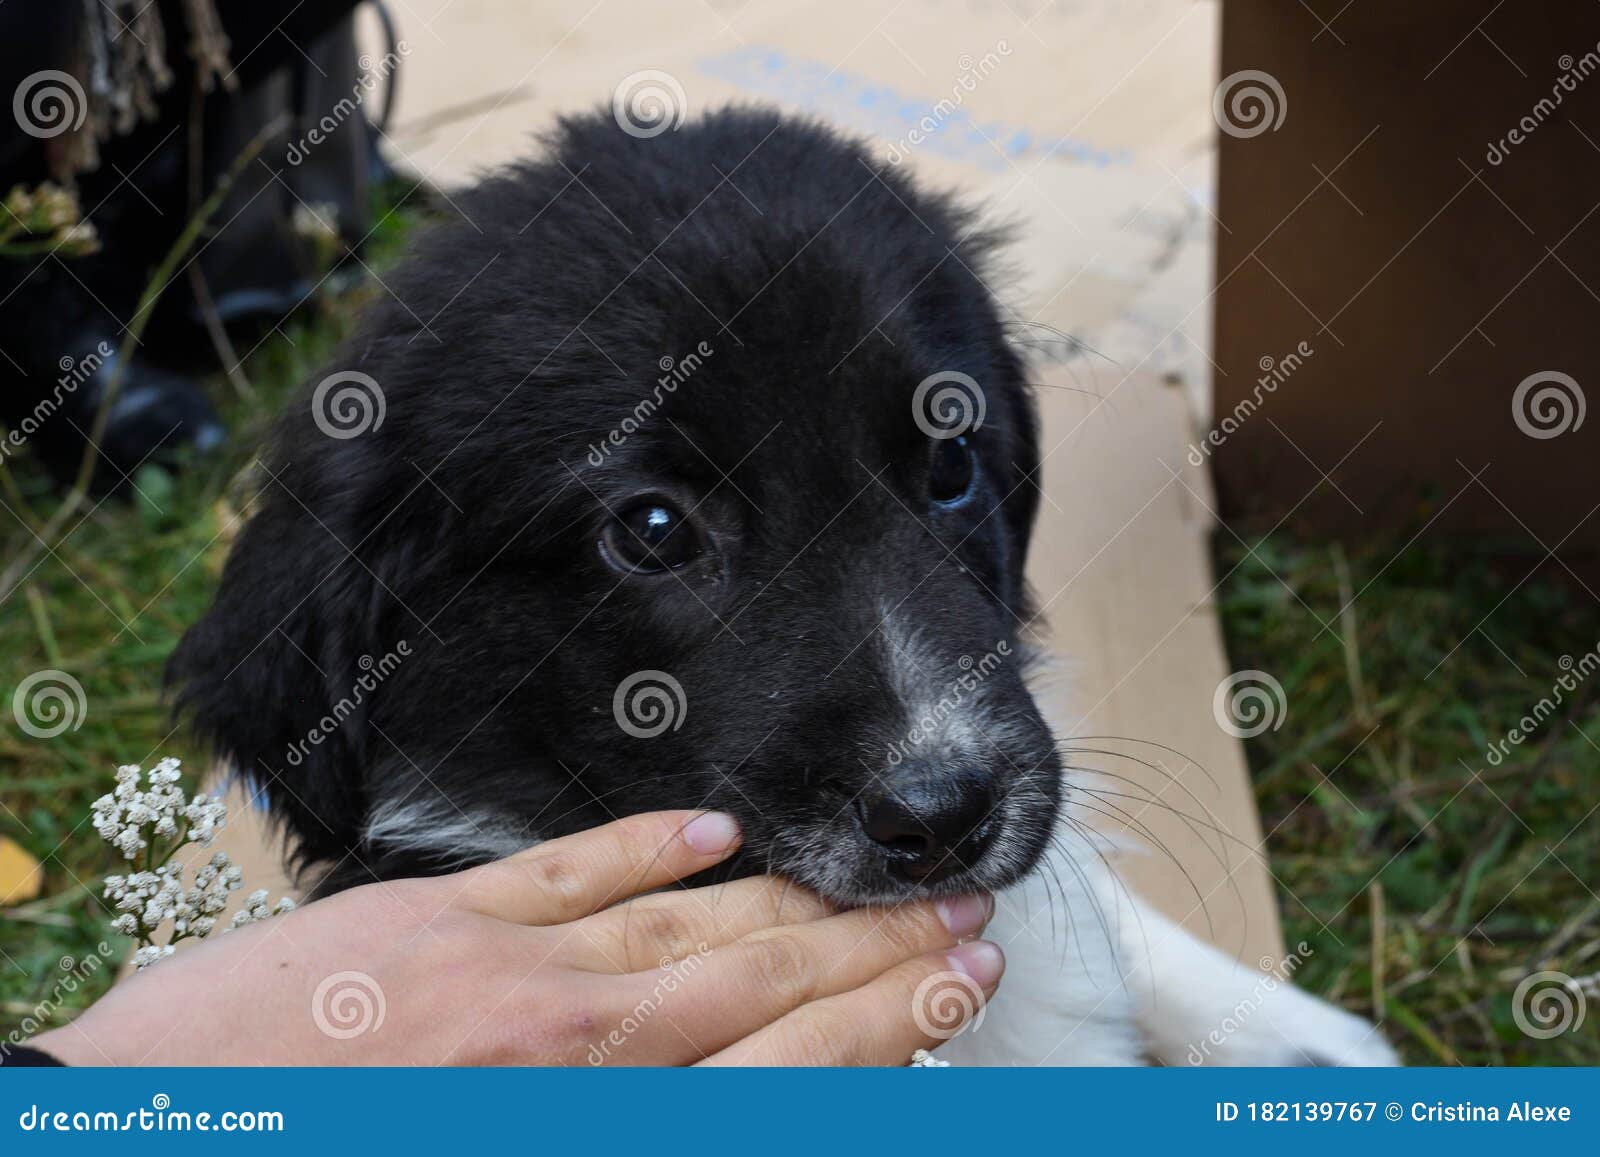 312 Dog Biting Hand Photos Free Royalty Free Stock Photos From Dreamstime